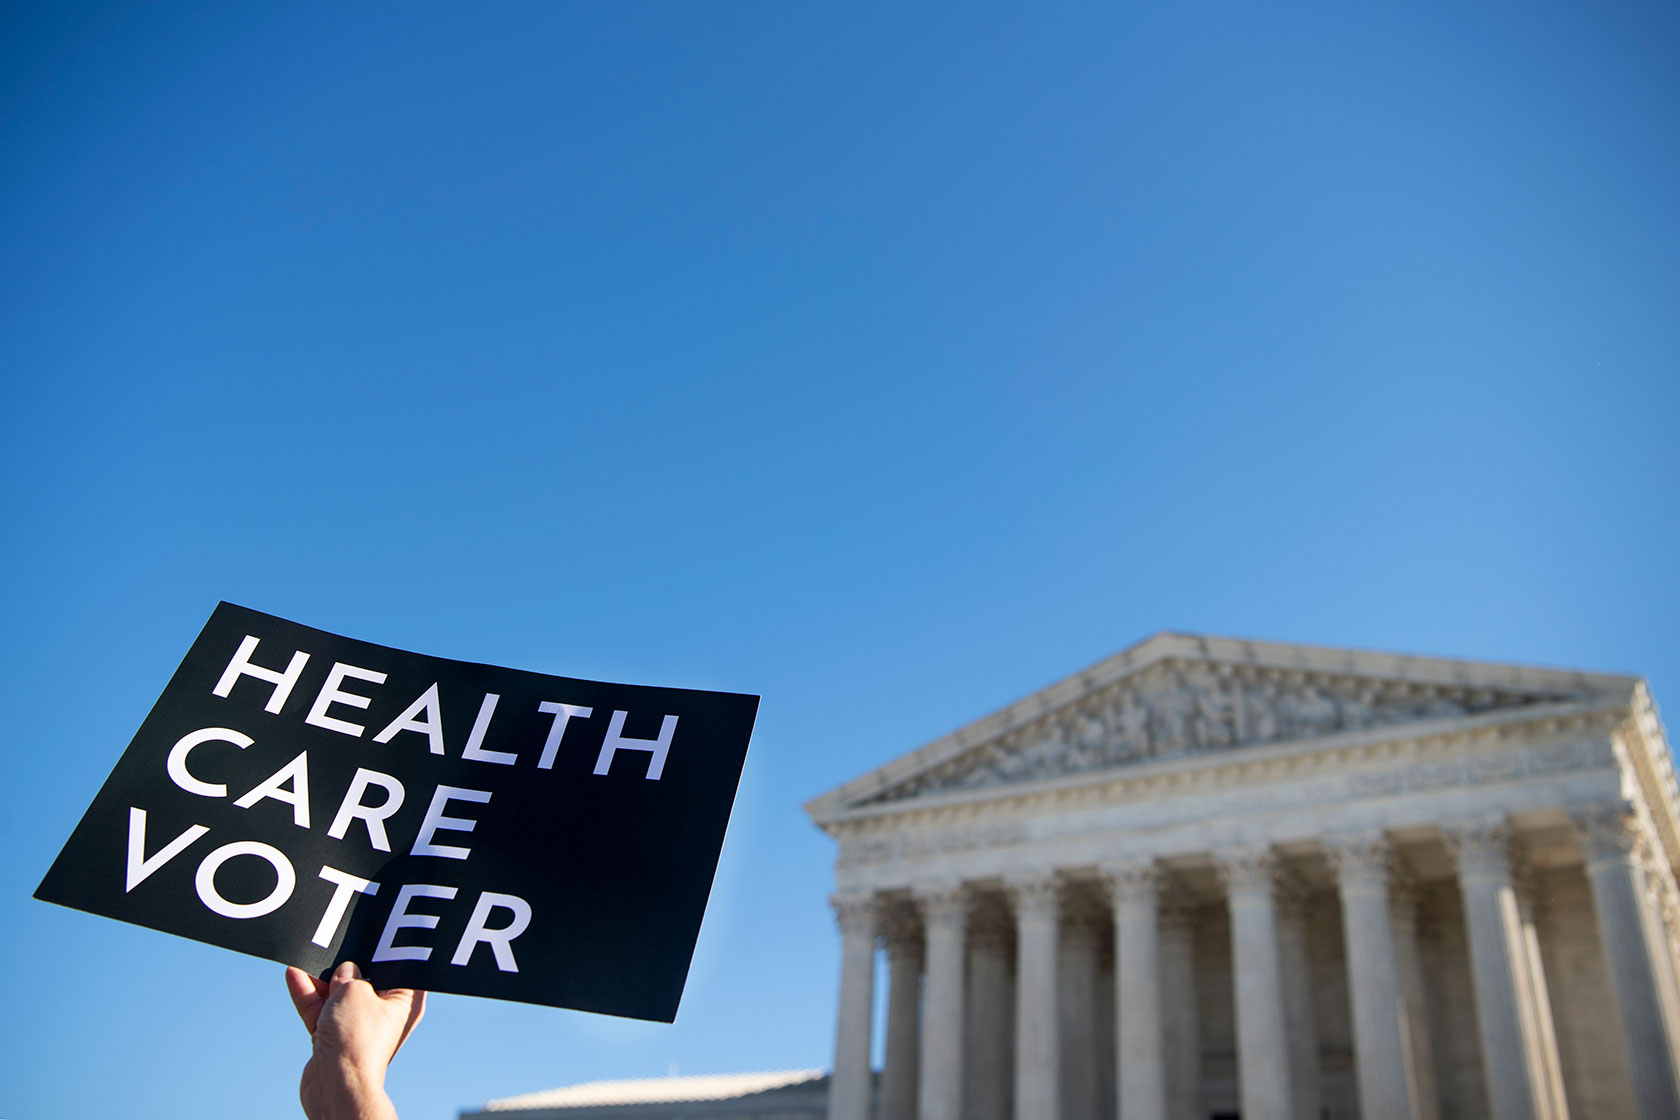 A demonstrator holds up a sign in support of the Affordable Care Act in front of the Supreme Court.